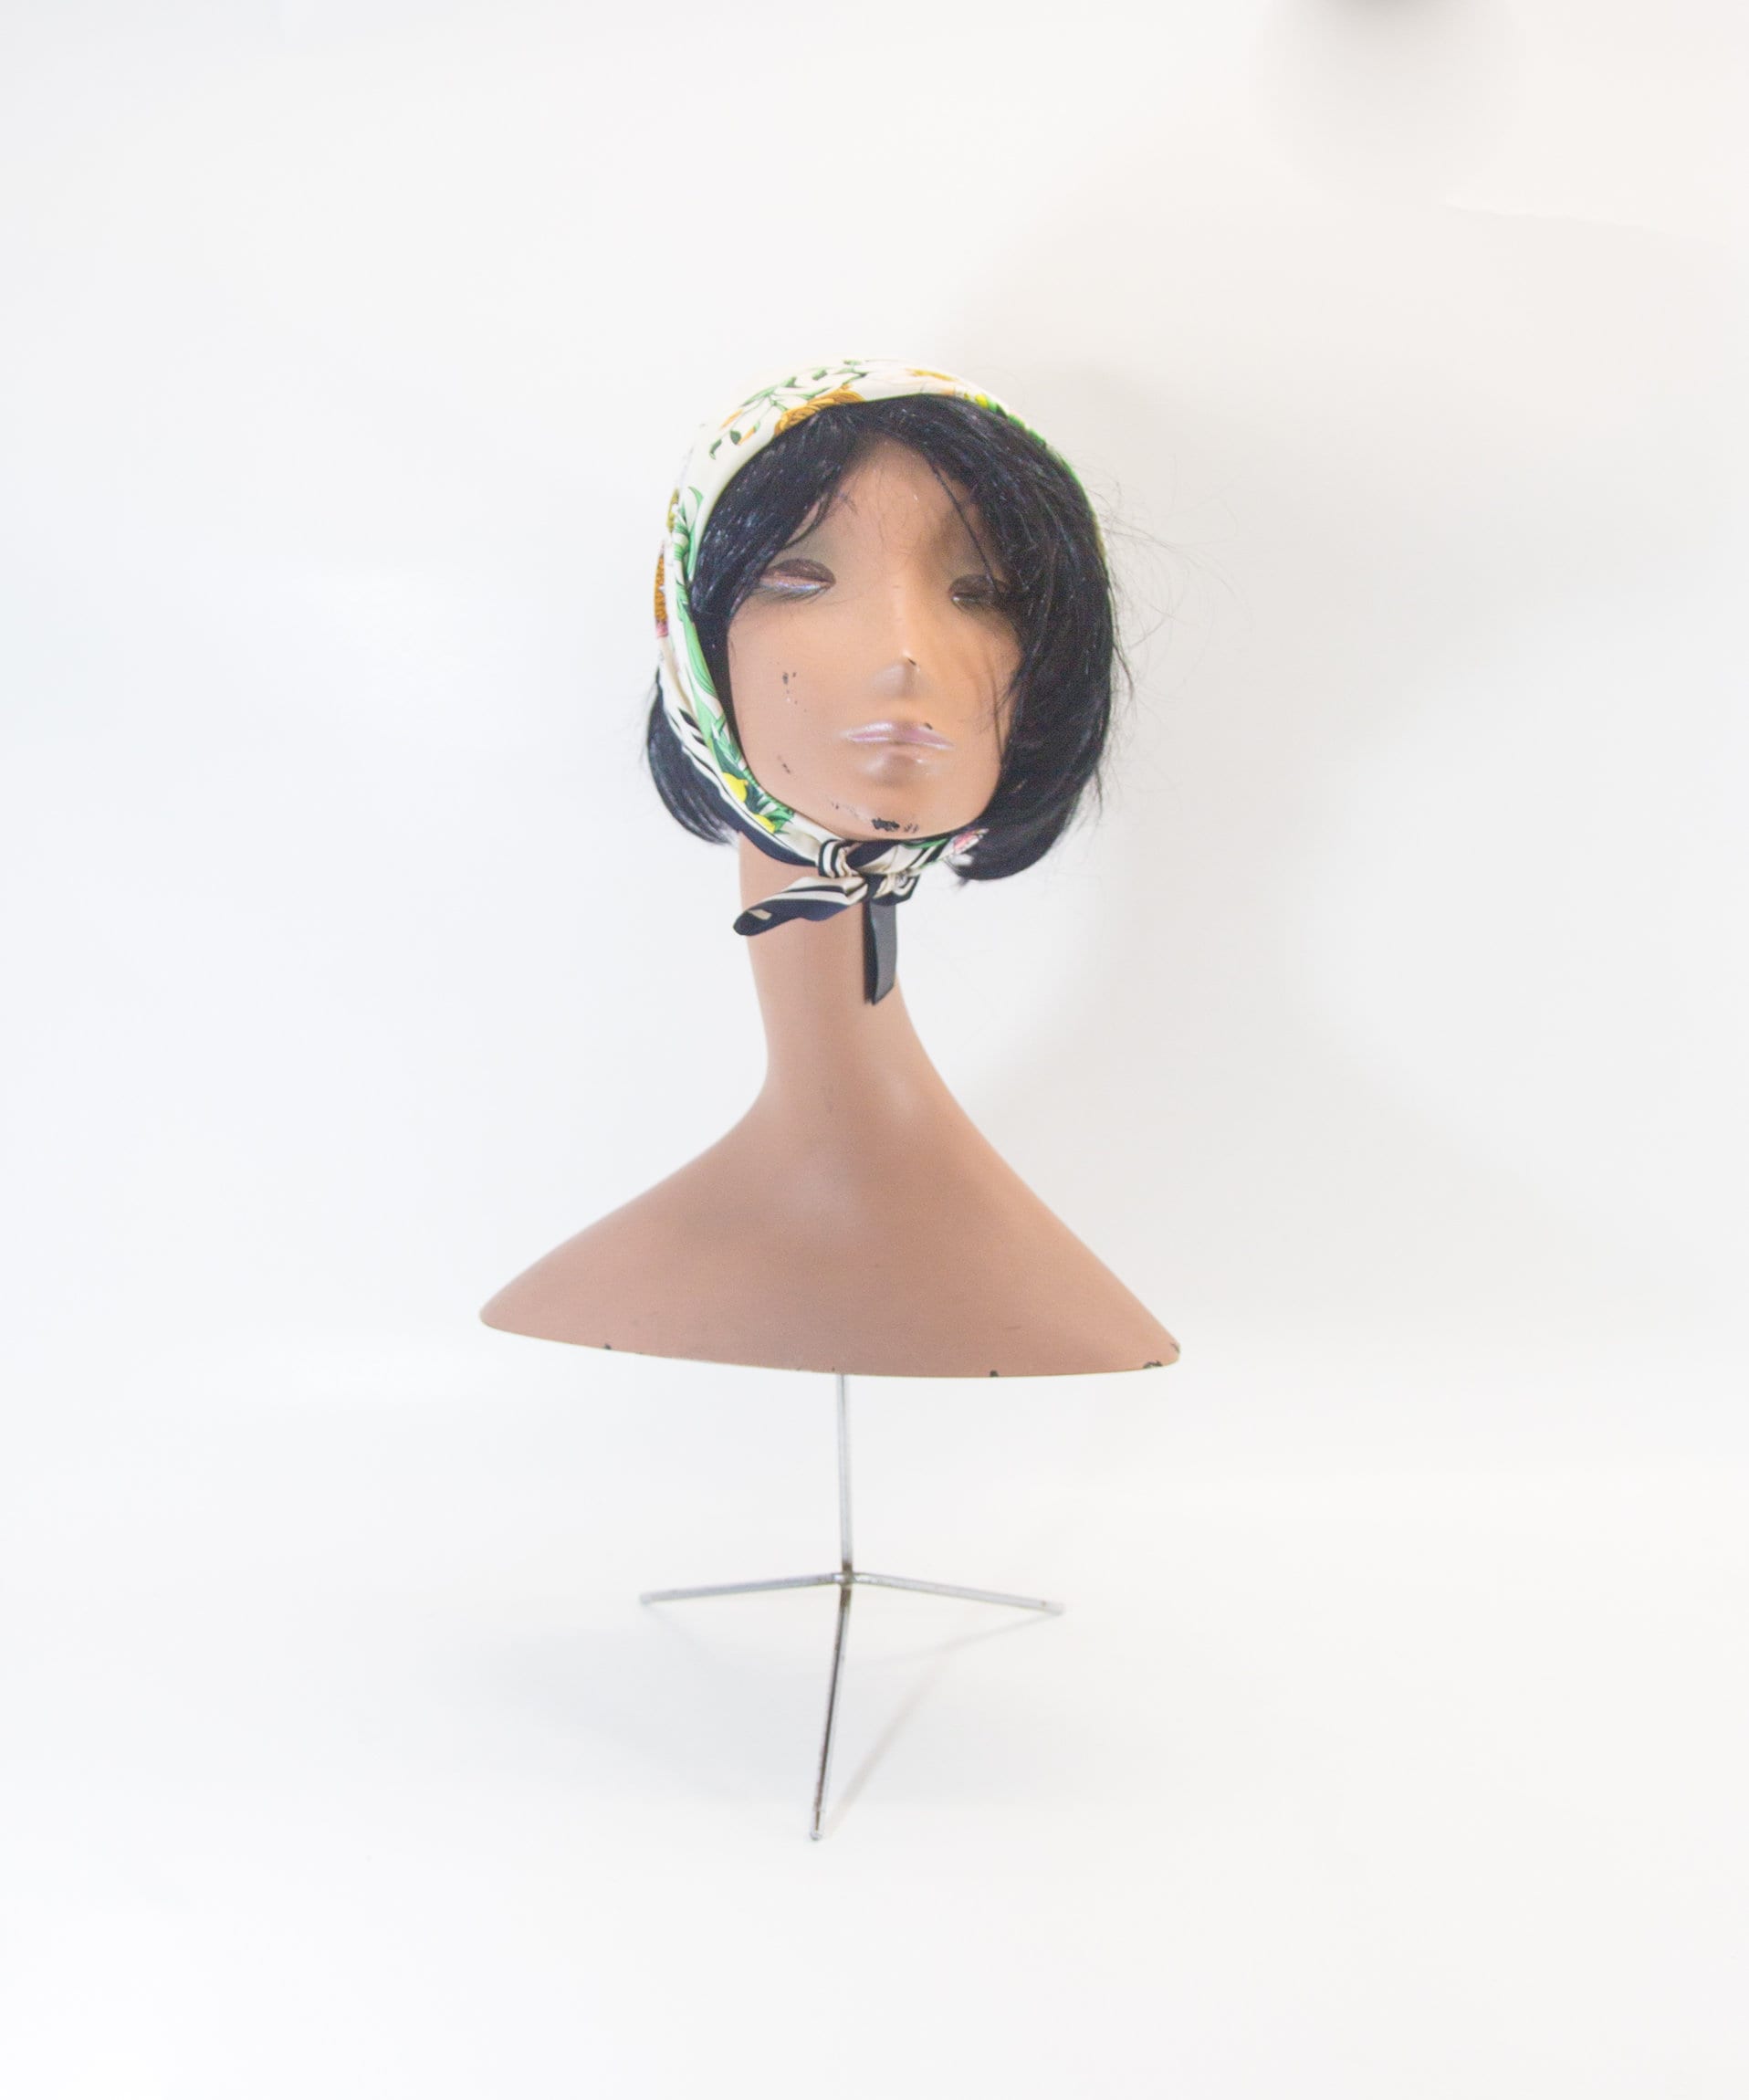 Luxury Chrome Silver Gold Head Display Dress Form,plate Mannequin Head for  Wig Hat Display Model,sunglasses Jewelry Holder Cheap Head Stand 